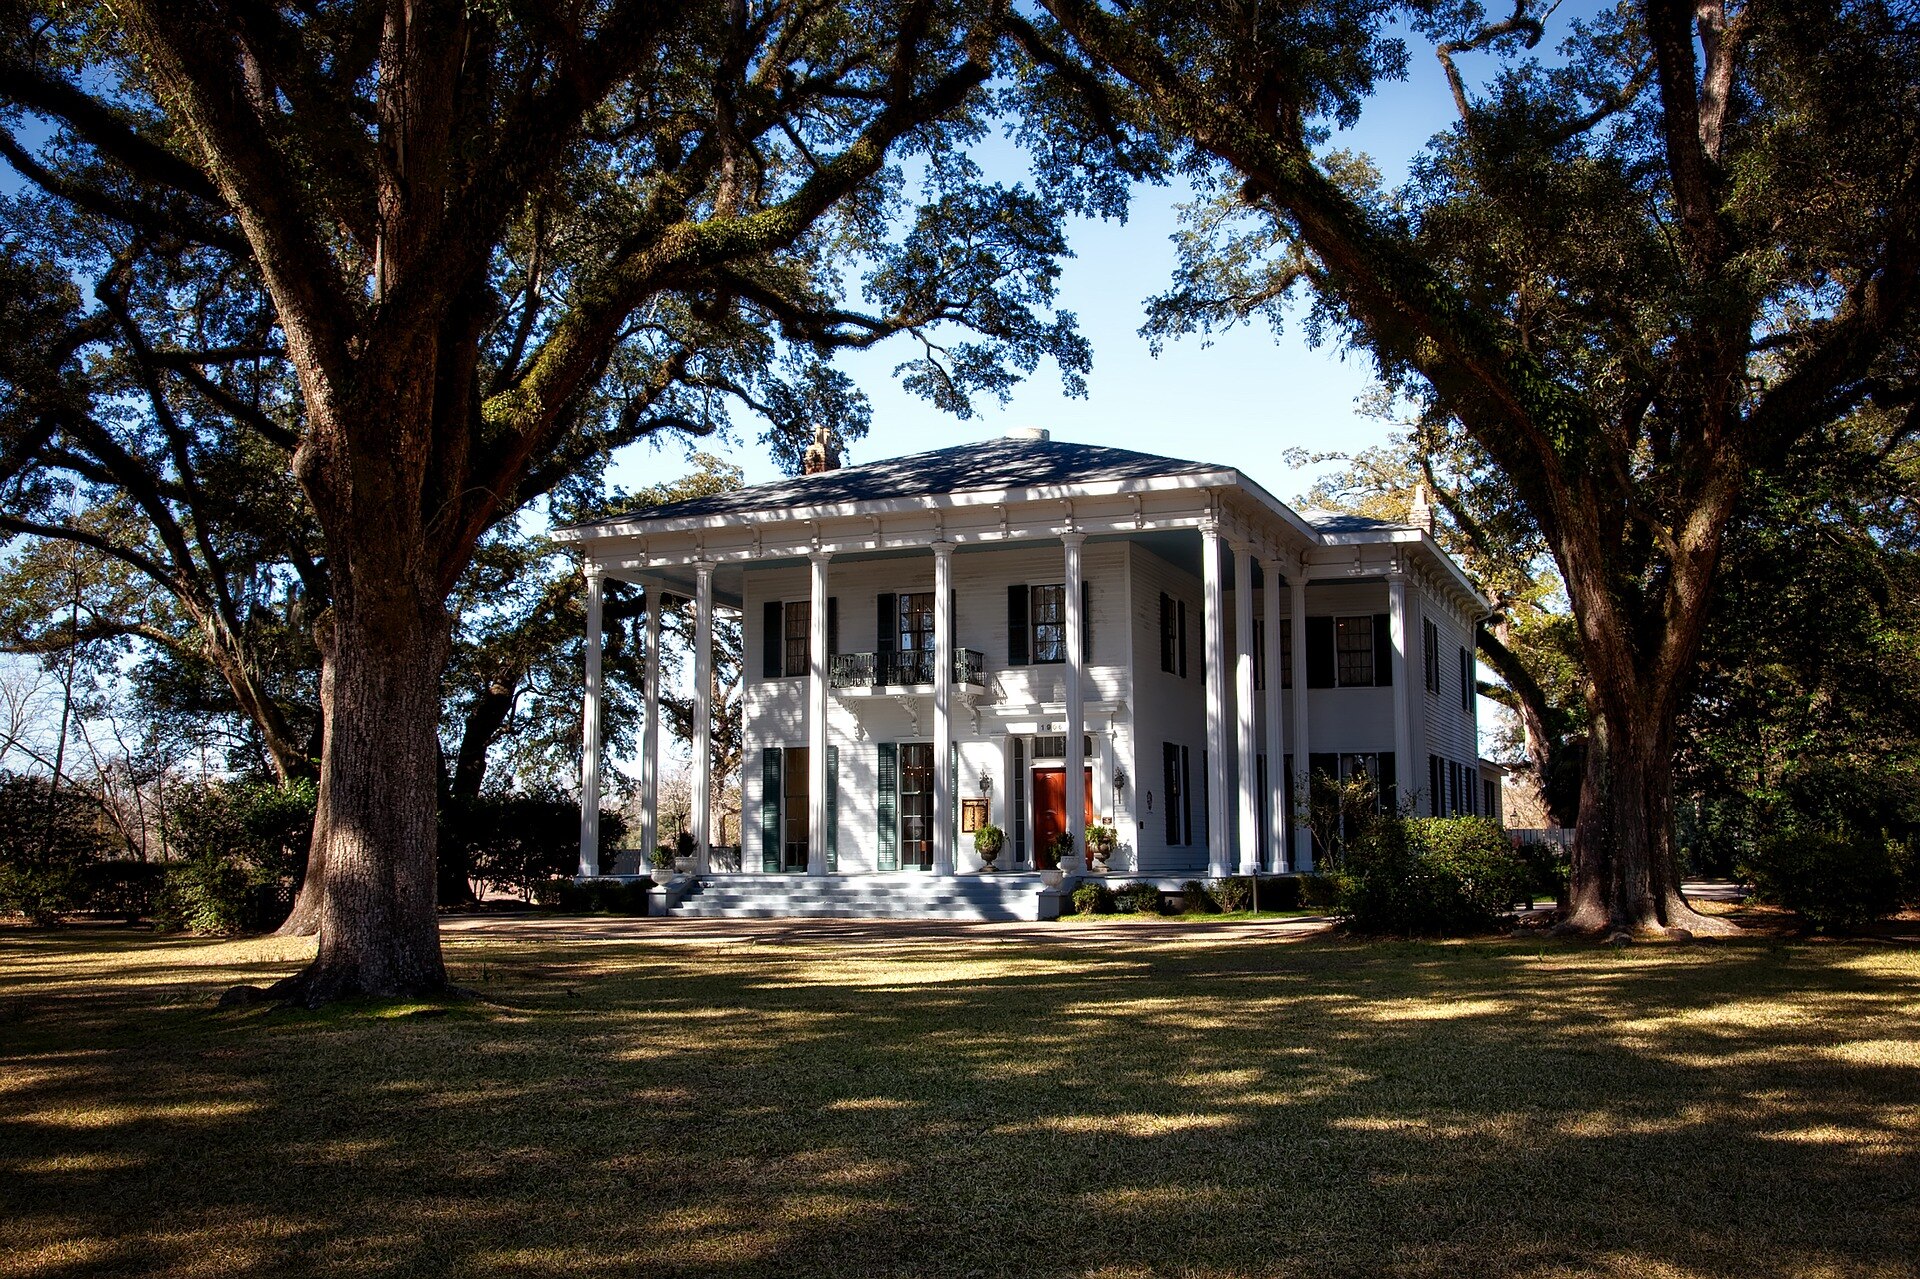 A photo of the entrance to the Bragg-Mitchell mansion in Mobile, Ala.